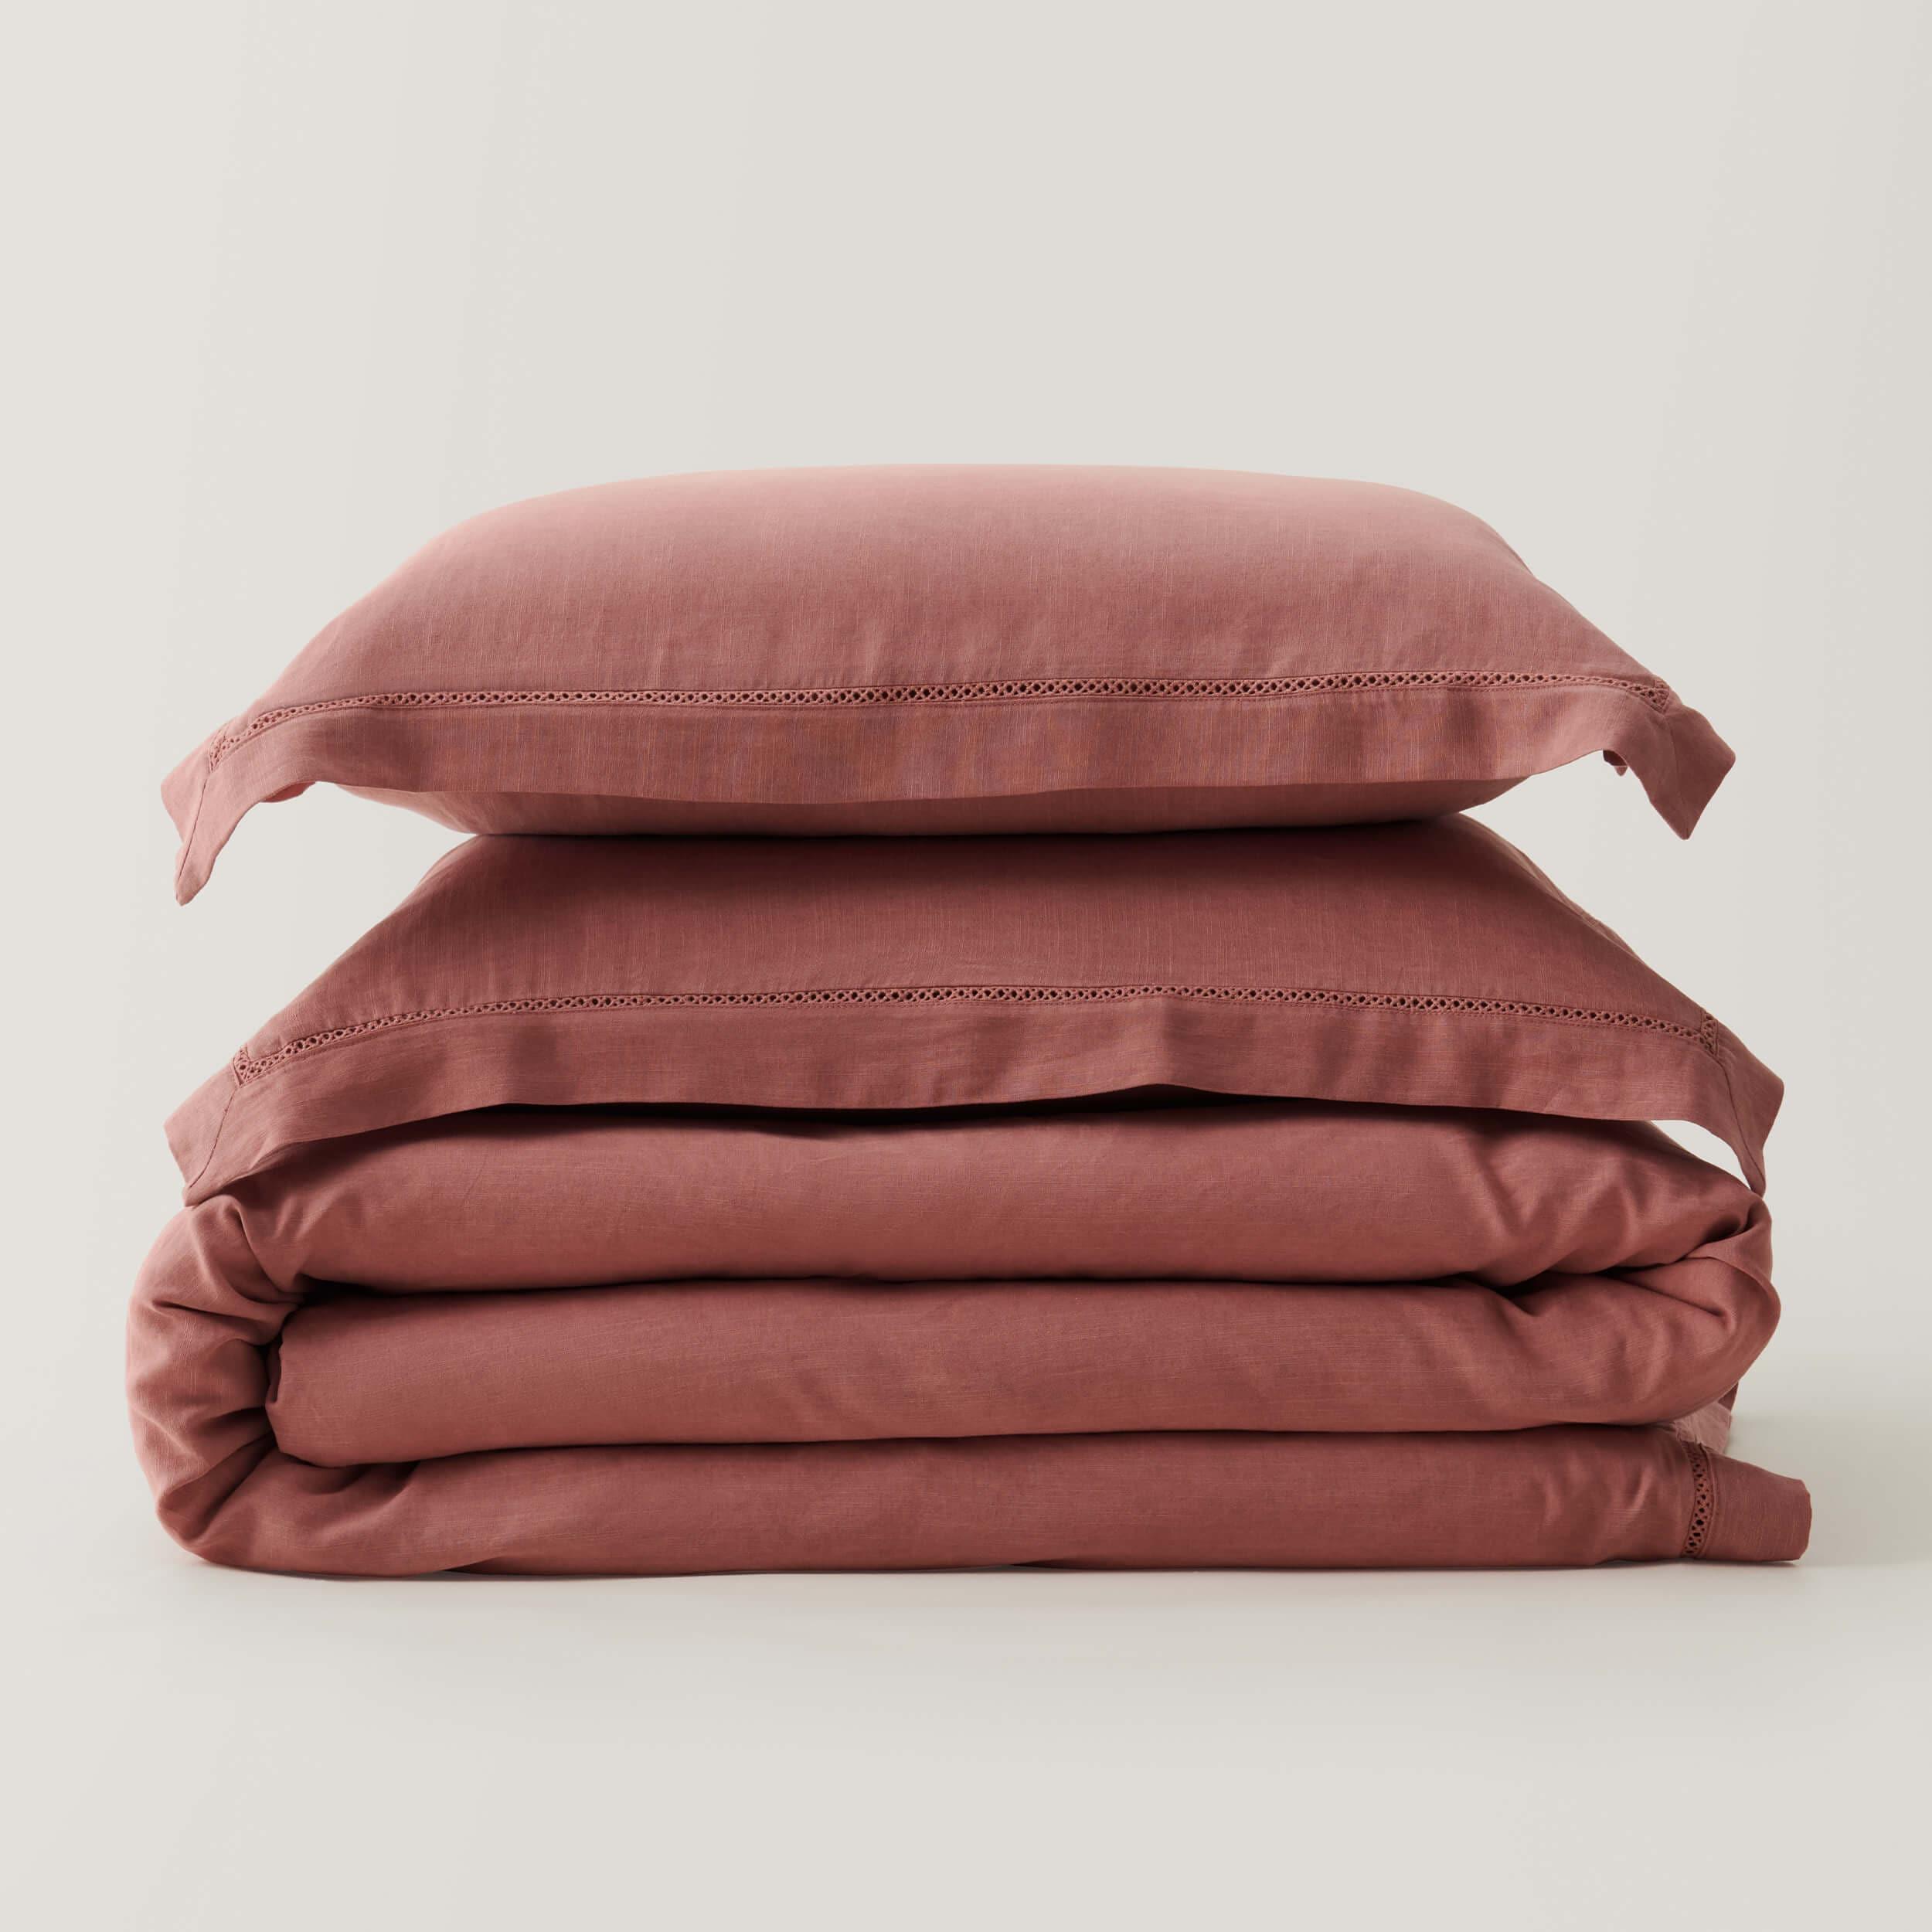 The king duvet cover set is available in a variety of colors to suit any bedroom decor.